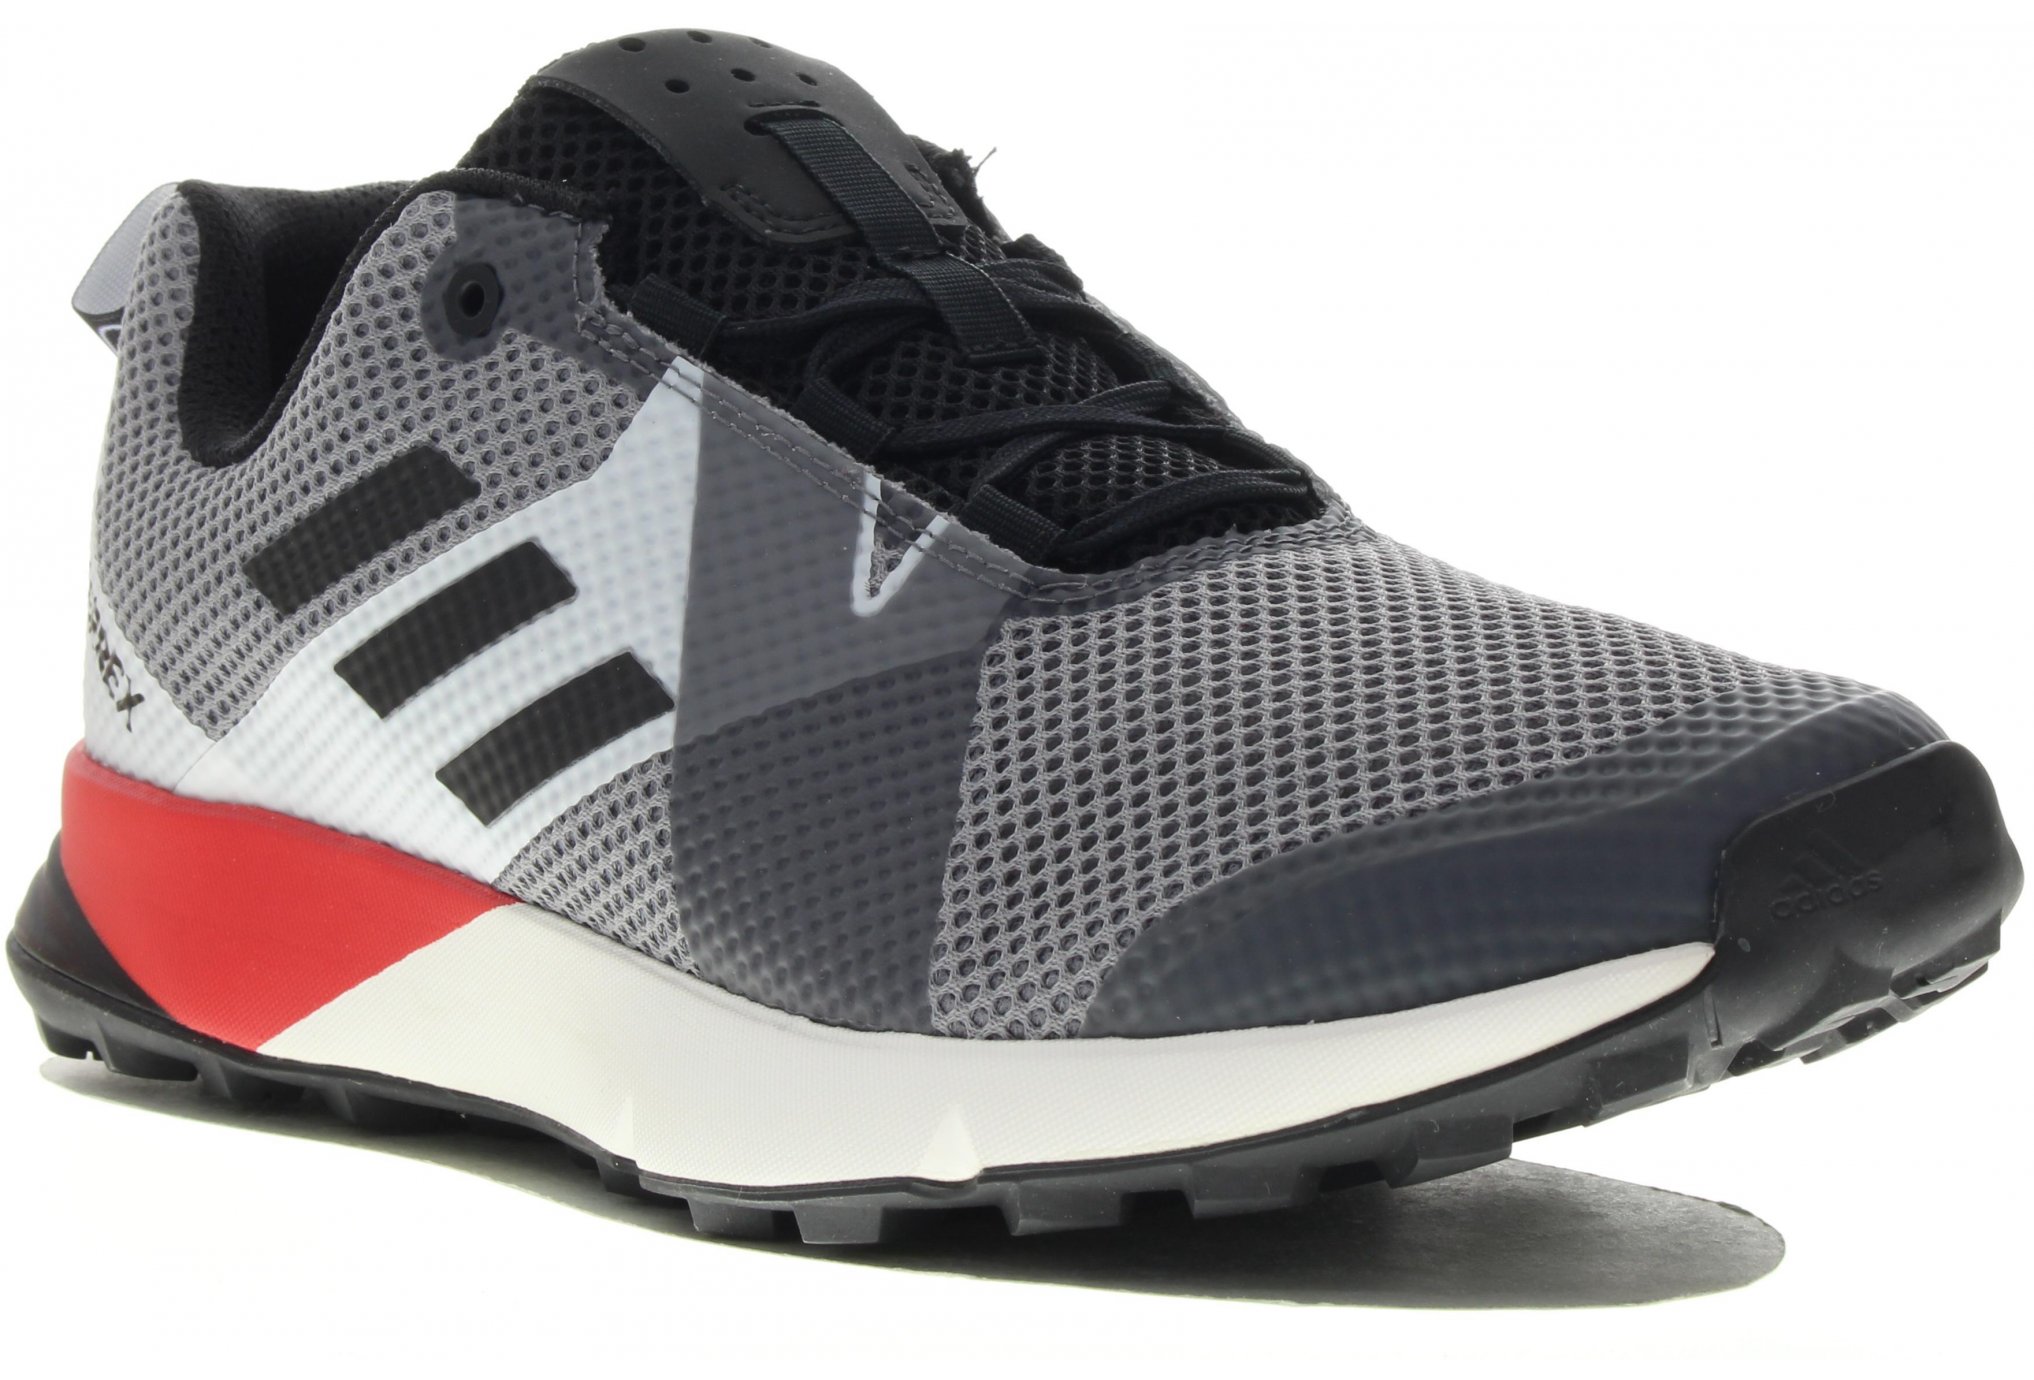 Adidas Terrex two m chaussures homme